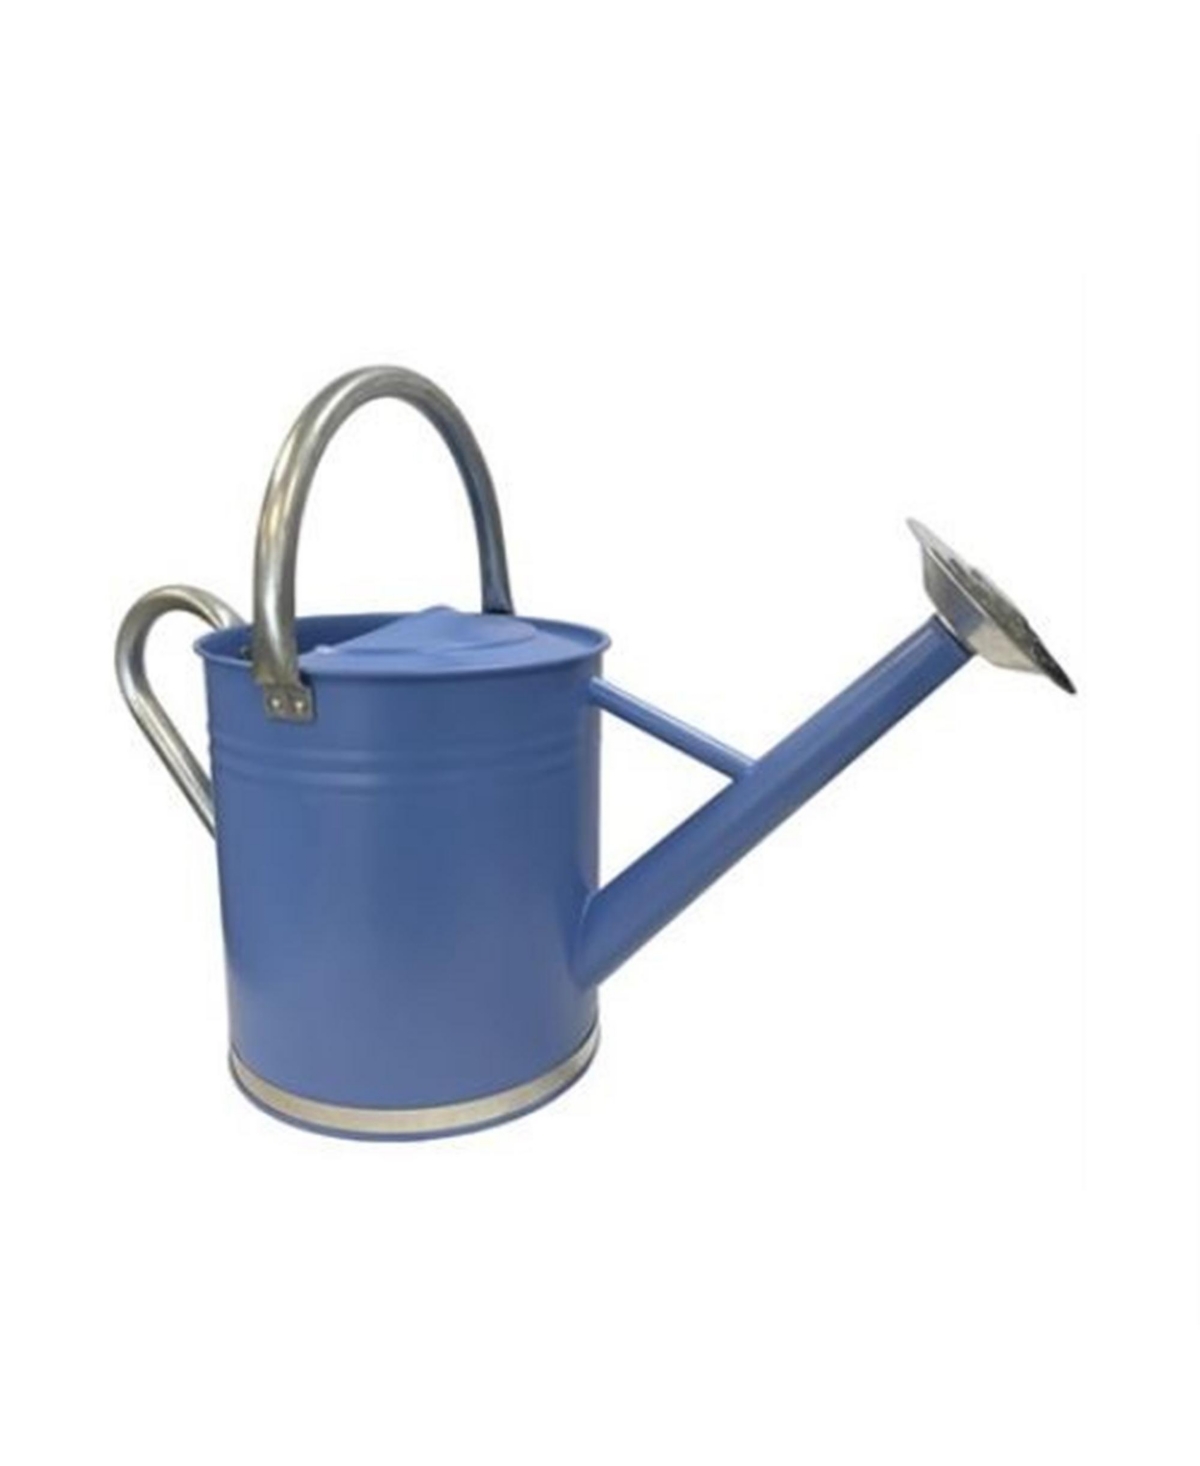 Gardener Select Metal Watering Can, Blue Galvanized Accents, 1.85 Gal - Silver